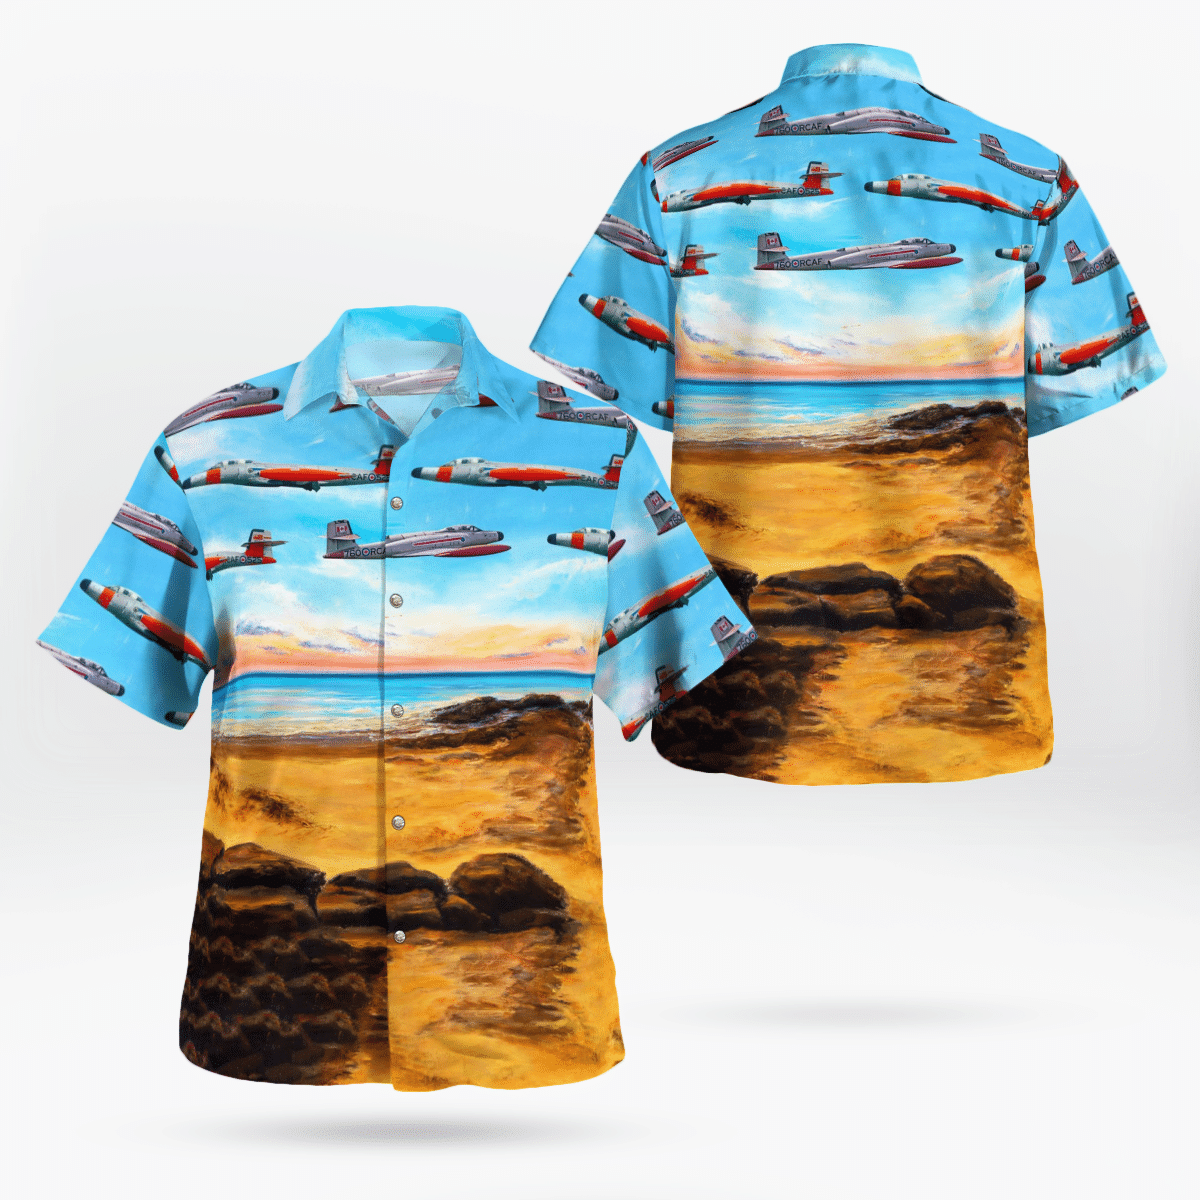 Shop now to find the perfect Hawaii Shirt for your hobby 66